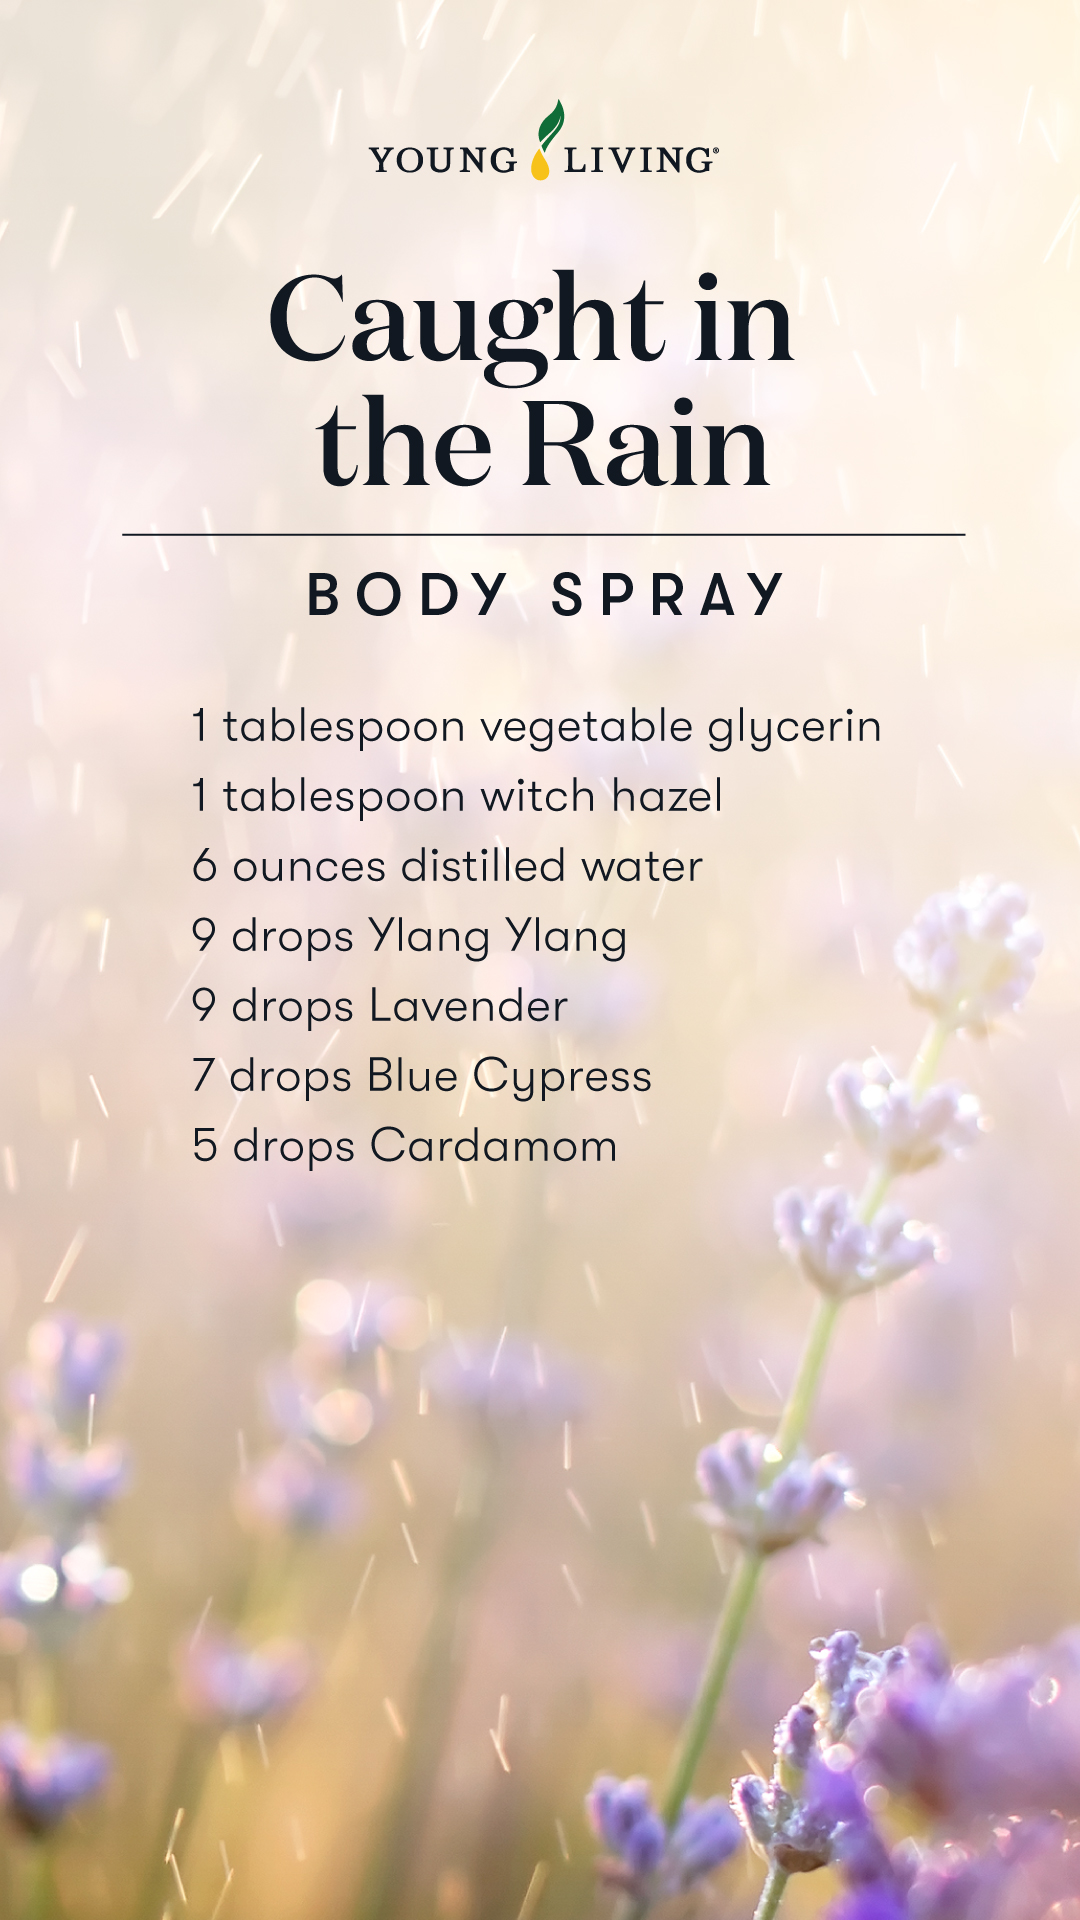 Caught in the Rain body spray recipe - Young Living Lavender Life Blog 